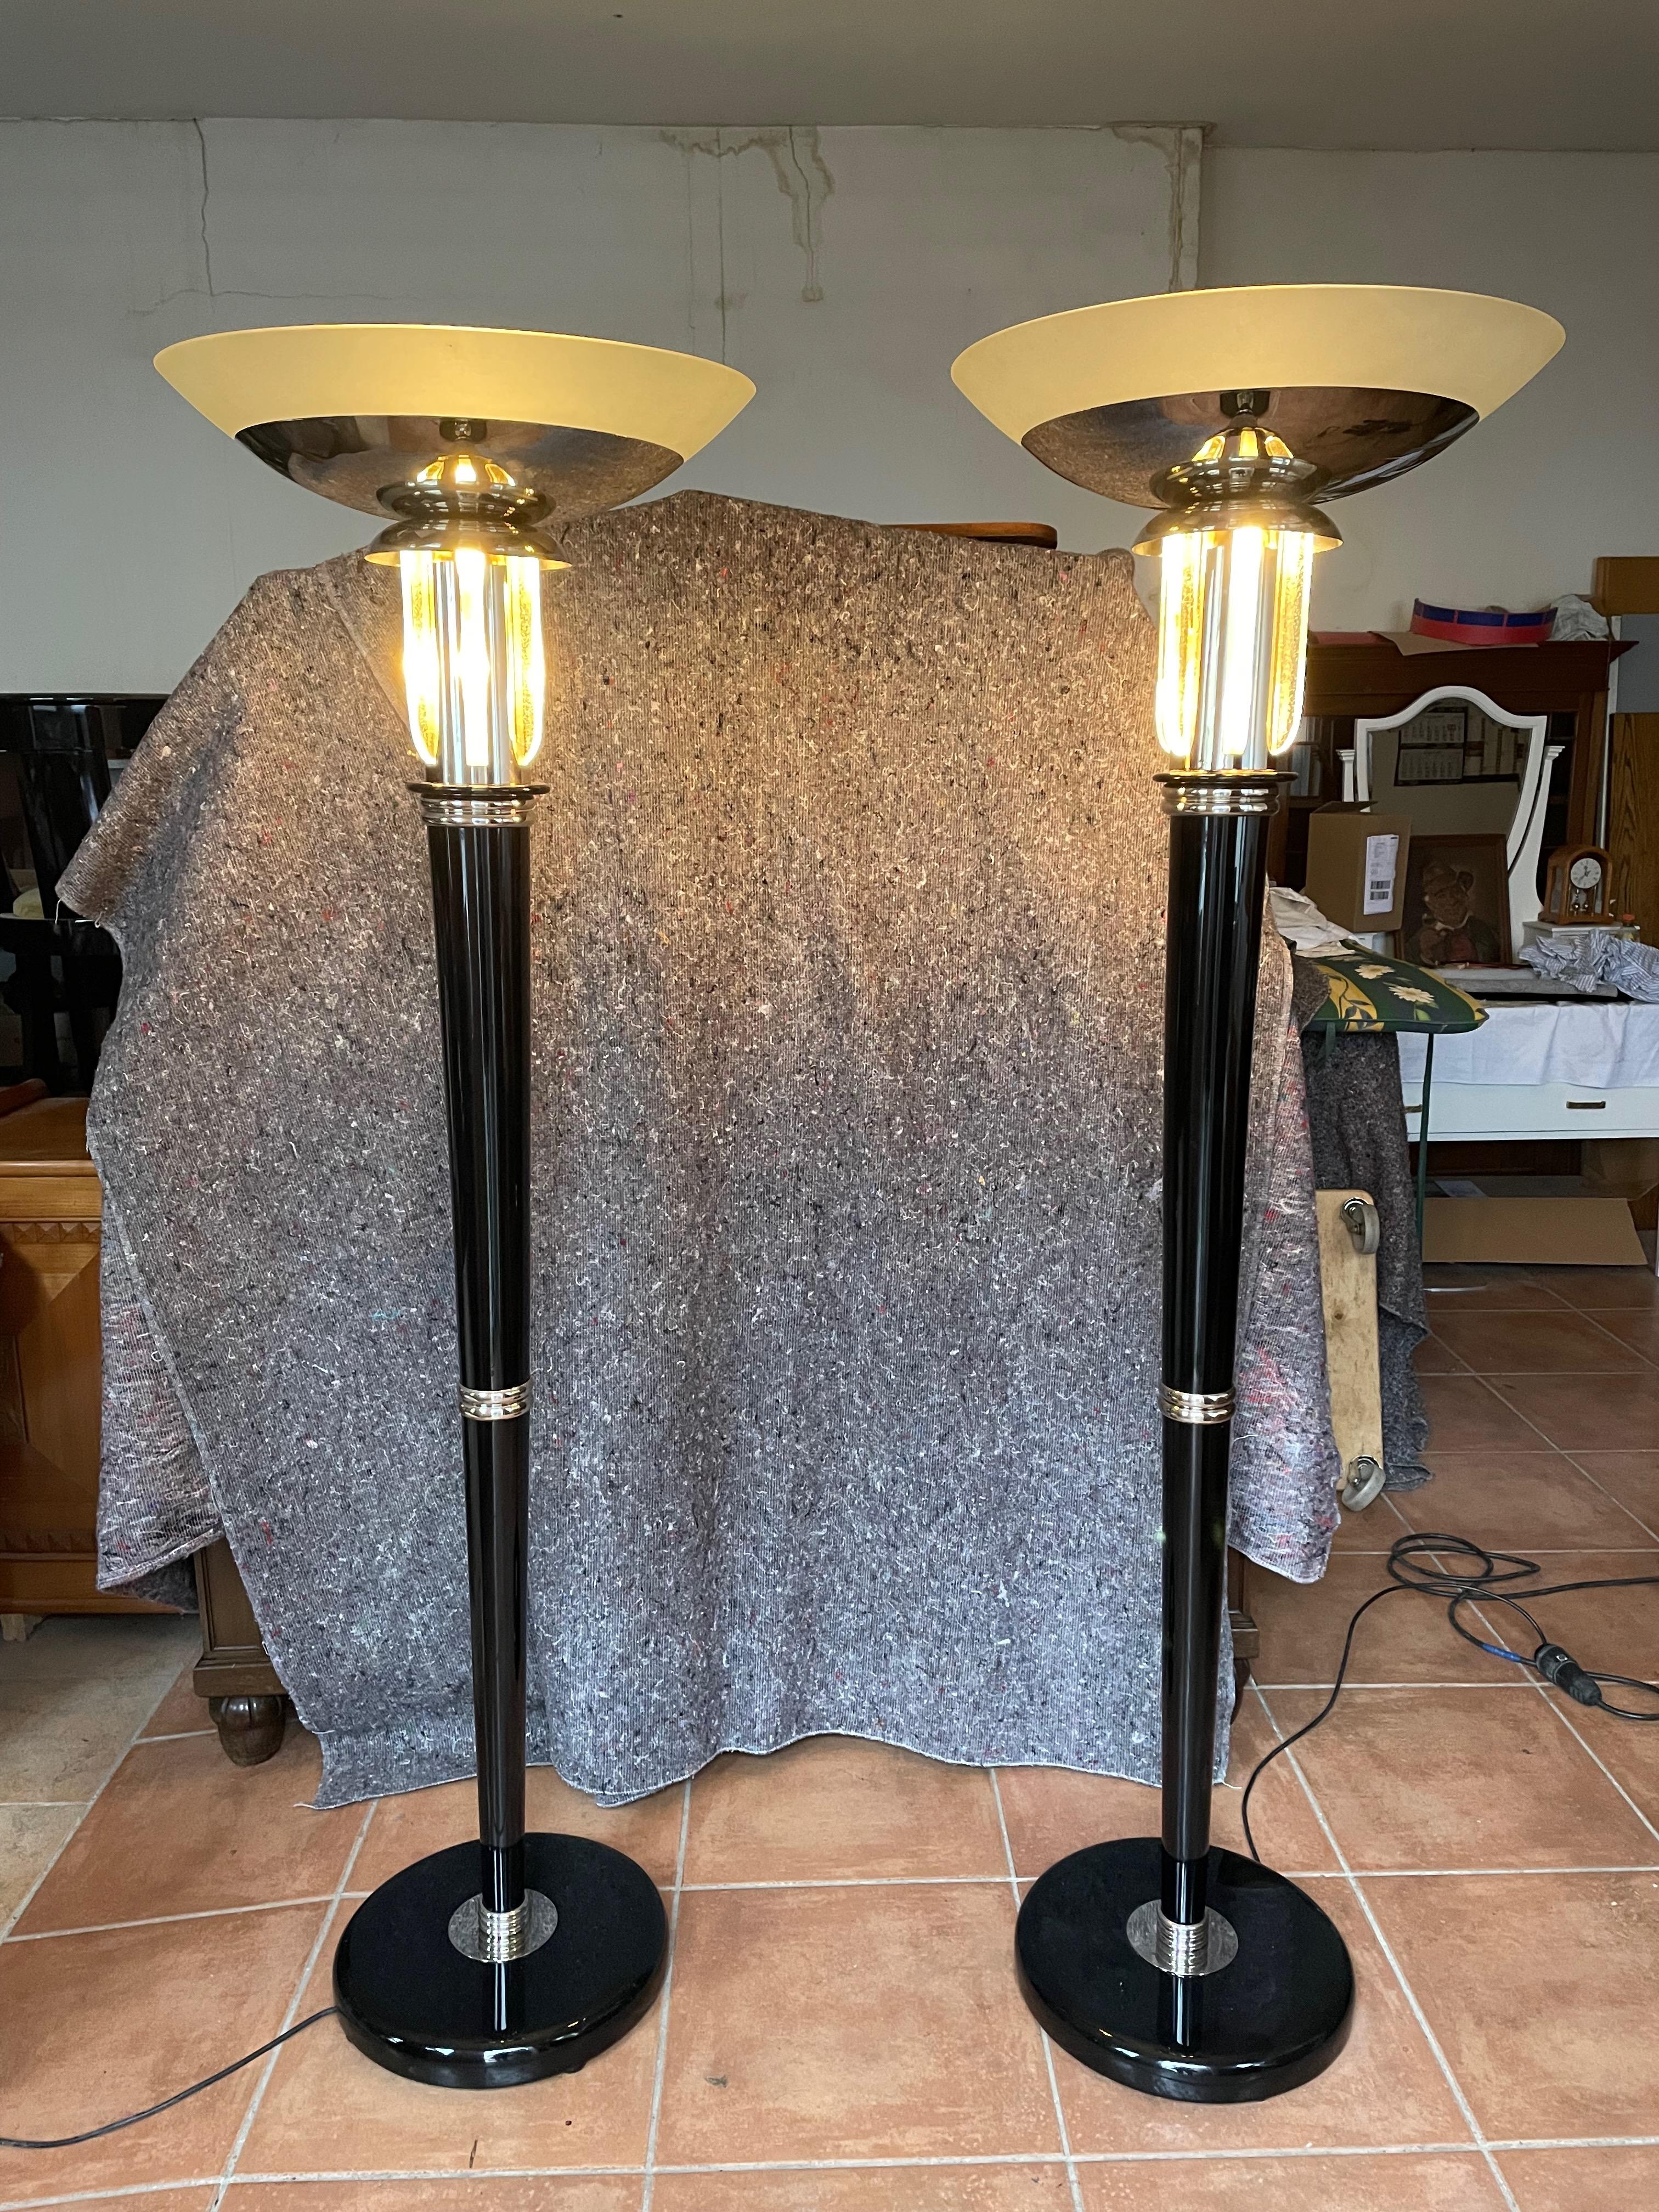 1 Pair of Spectacular very rare Art Déco floor lamps. France 1920s.
The Original lamps have been completely restored by a specialist.
High quality black piano lacquer.
New electrics.
Two bulbs inside each lamp. One bulb illuminates the wonderfl